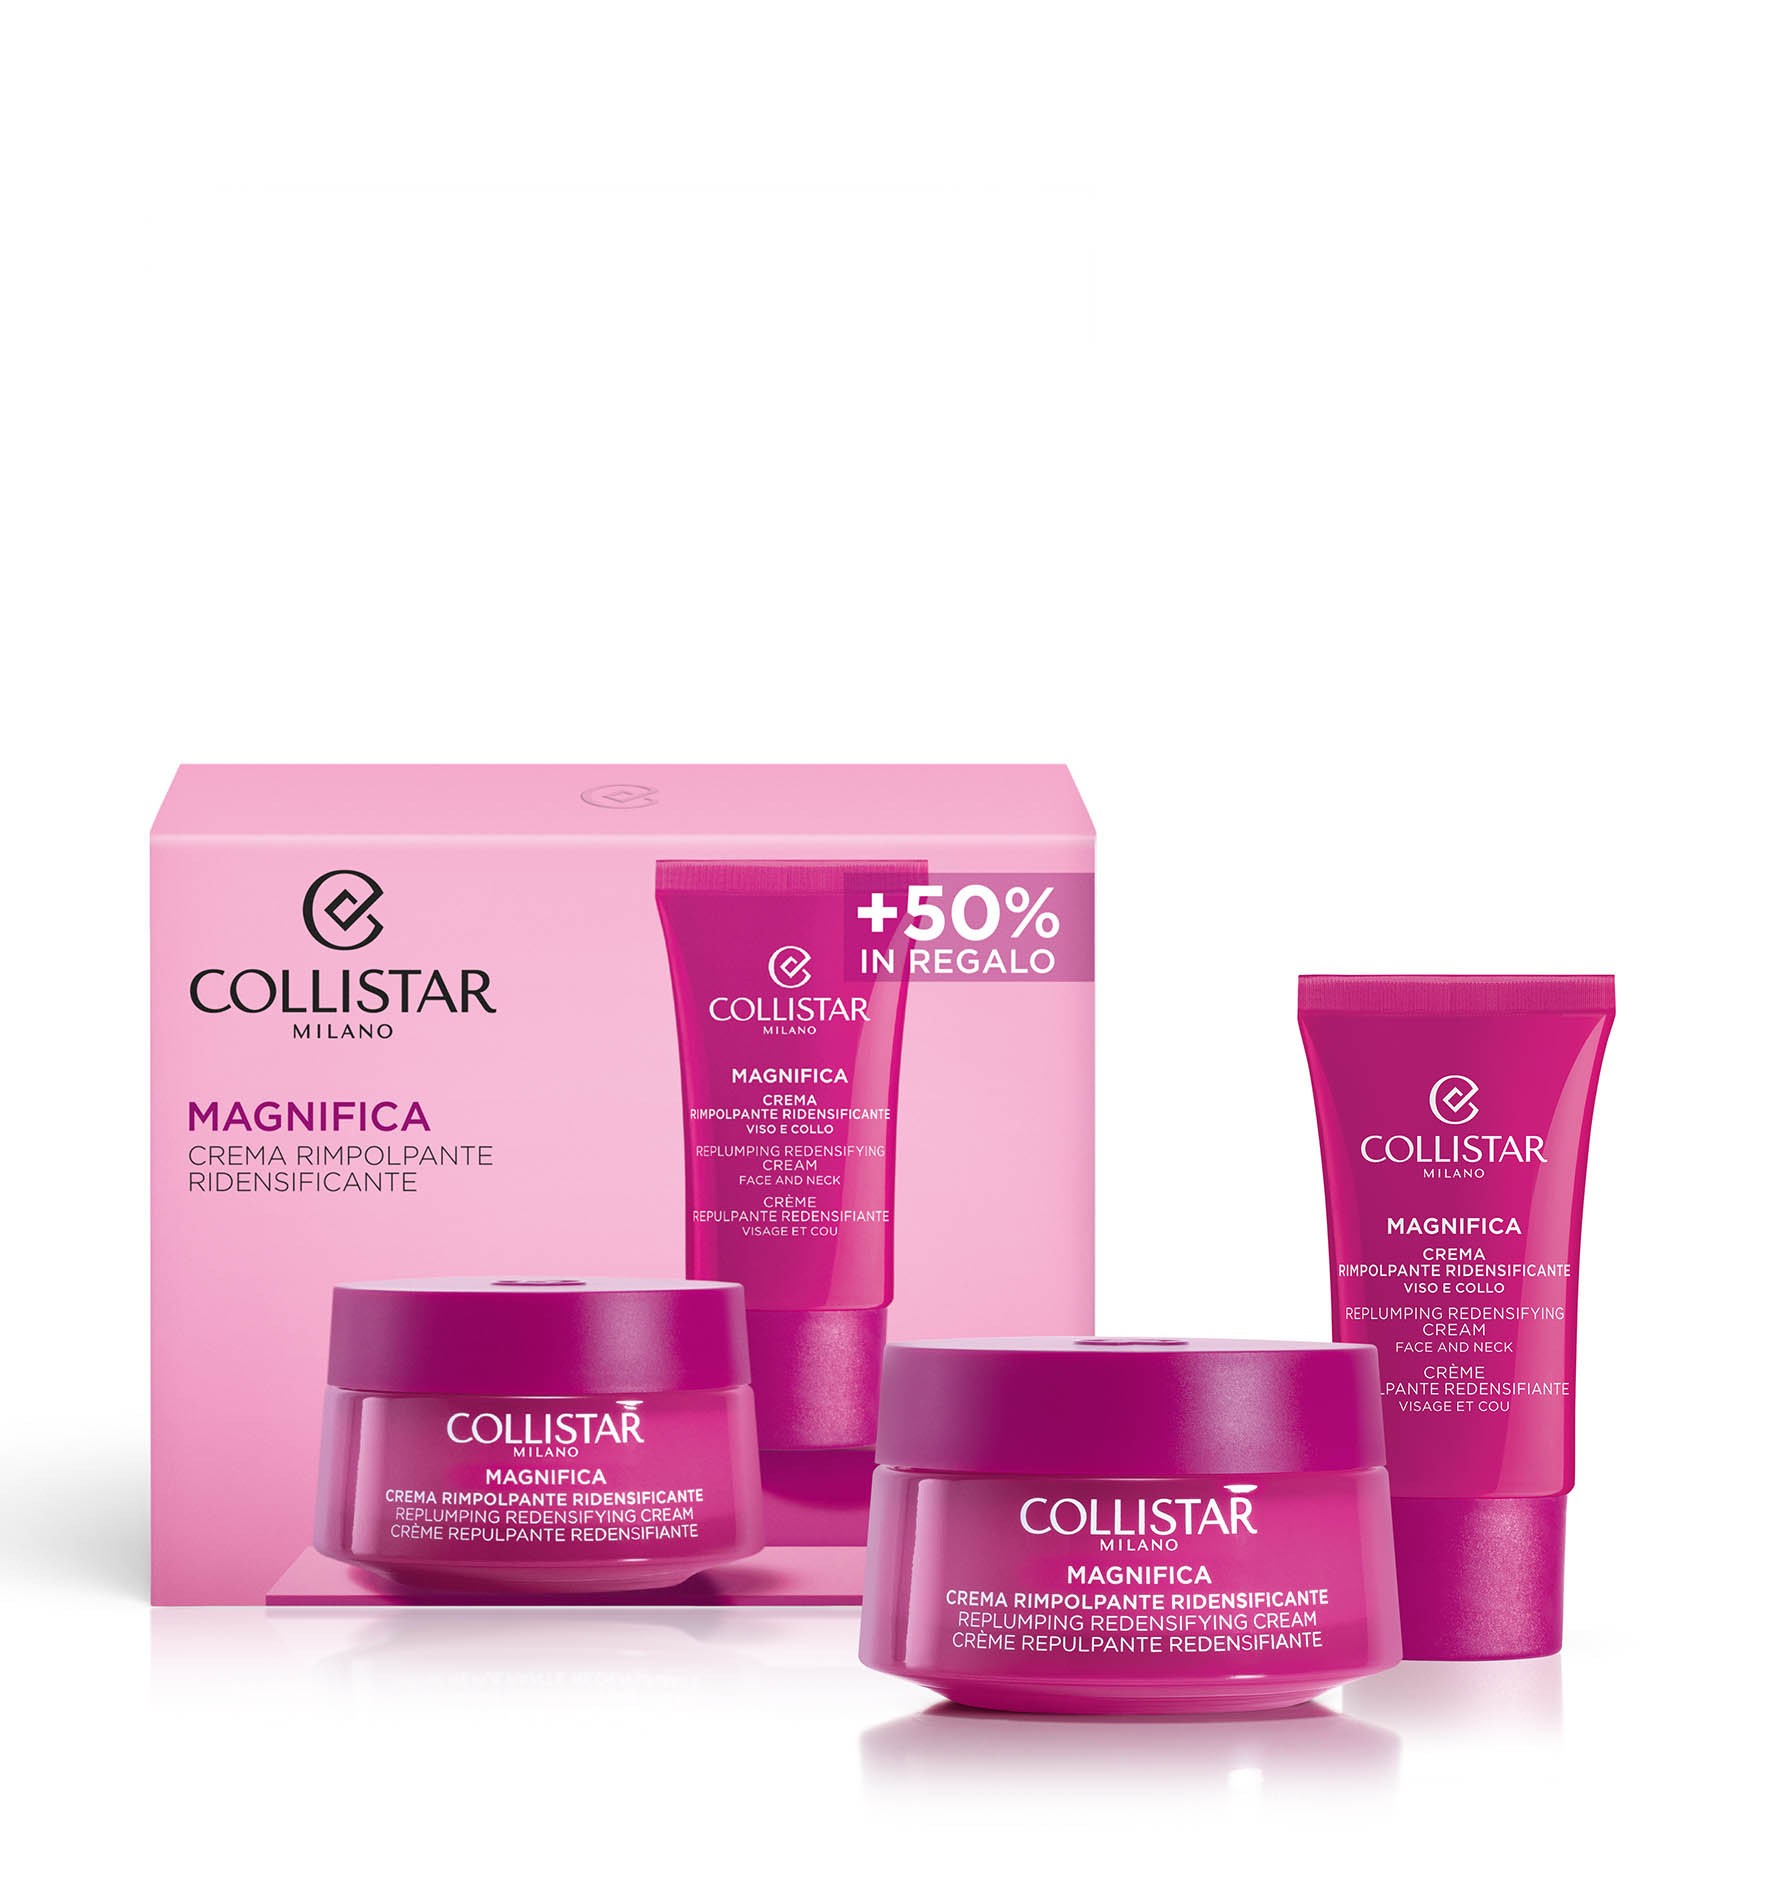 MAGNIFICA REPLUMPING REDENSIFYING CREAM 50 ml SET - Magnifica | Collistar - Shop Online Ufficiale